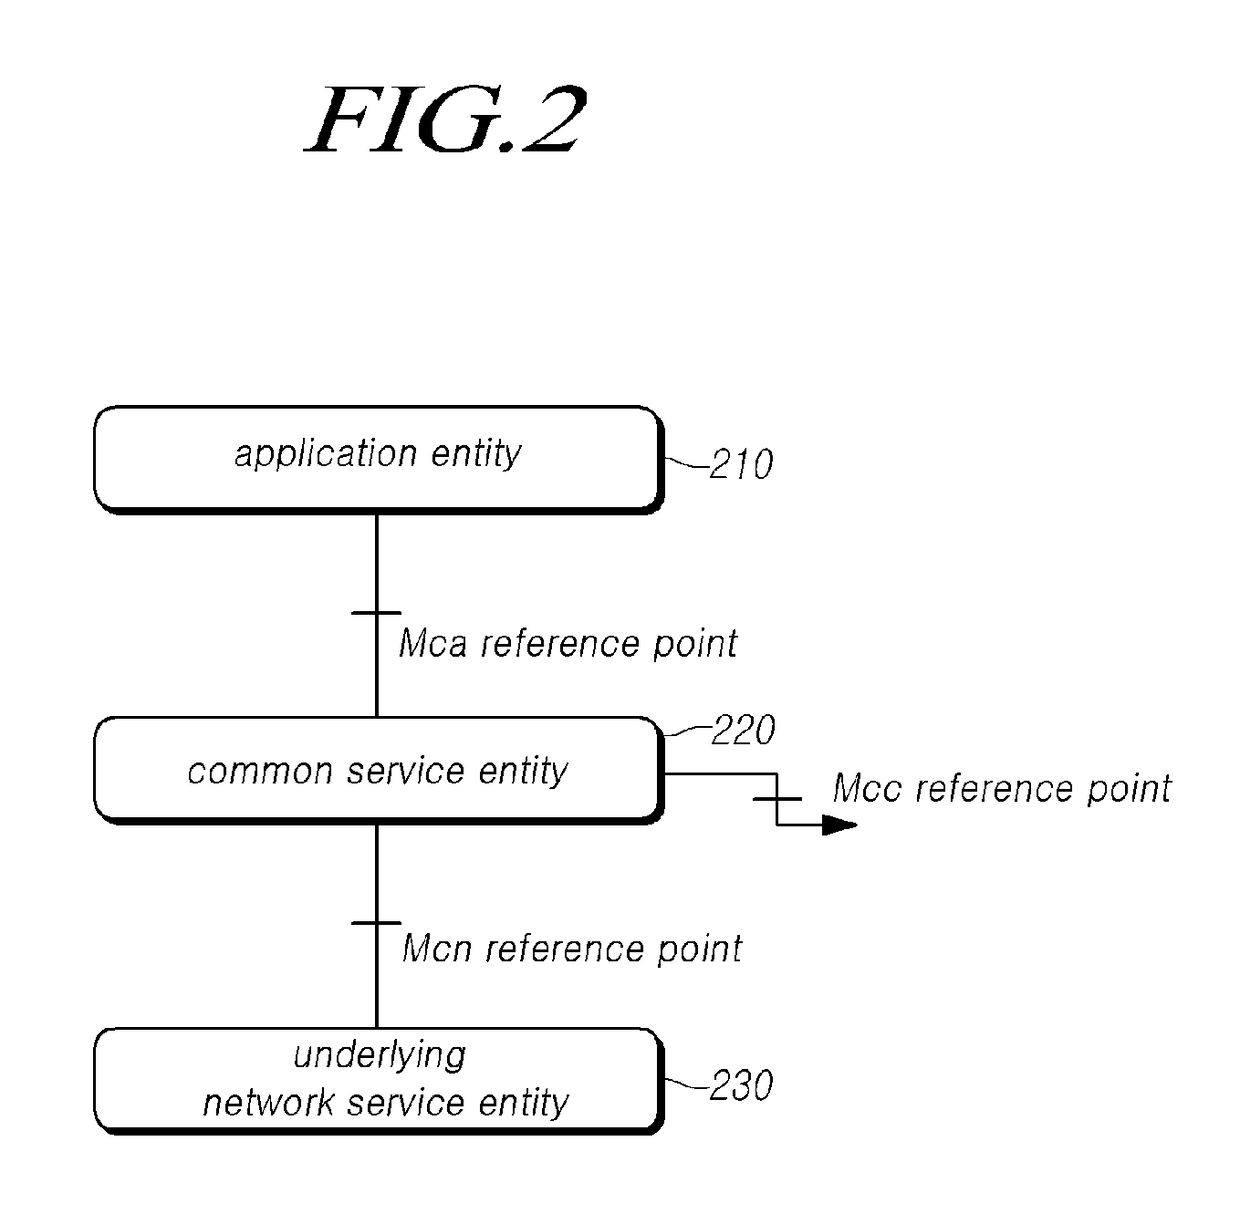 Method for changing update period of location information in m2m system